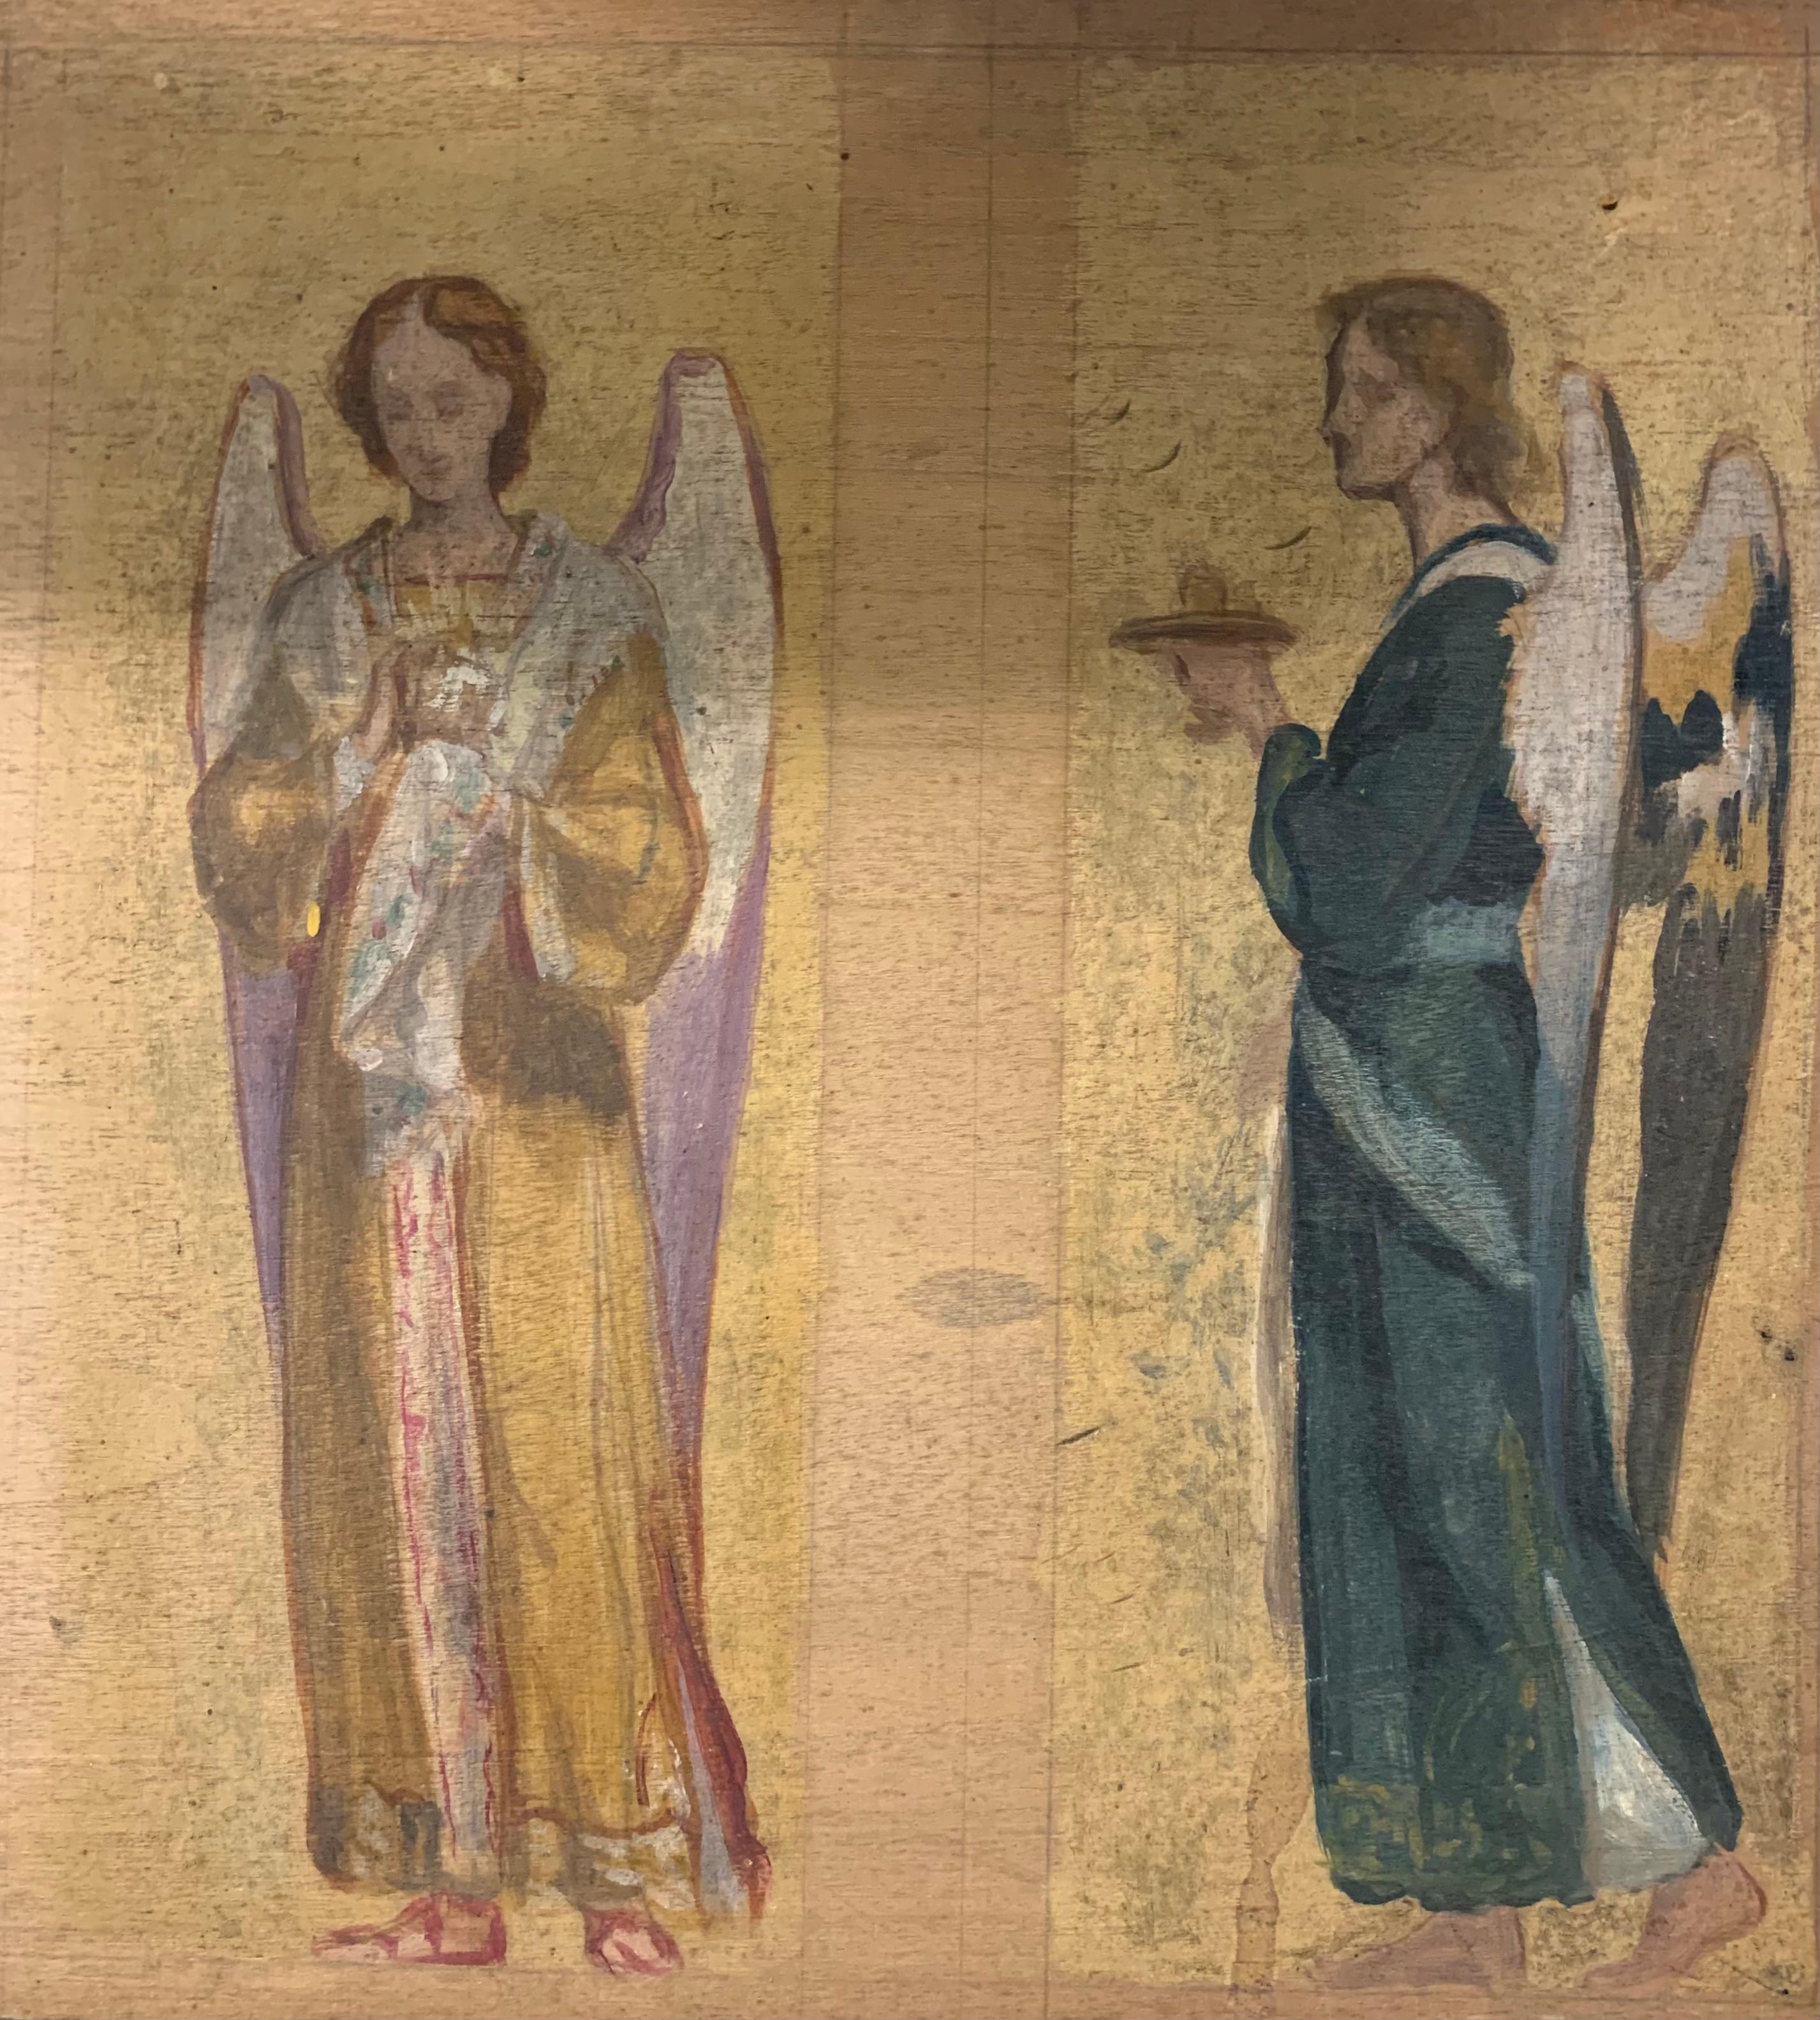 Sketch for frescoes with angels, on both sides of the panel.
End of the 19th century
Oil paintings on wood.
This sketch served as a sketch for the painter to present his pictorial project to clients.

On one side there is a flying angel holding a